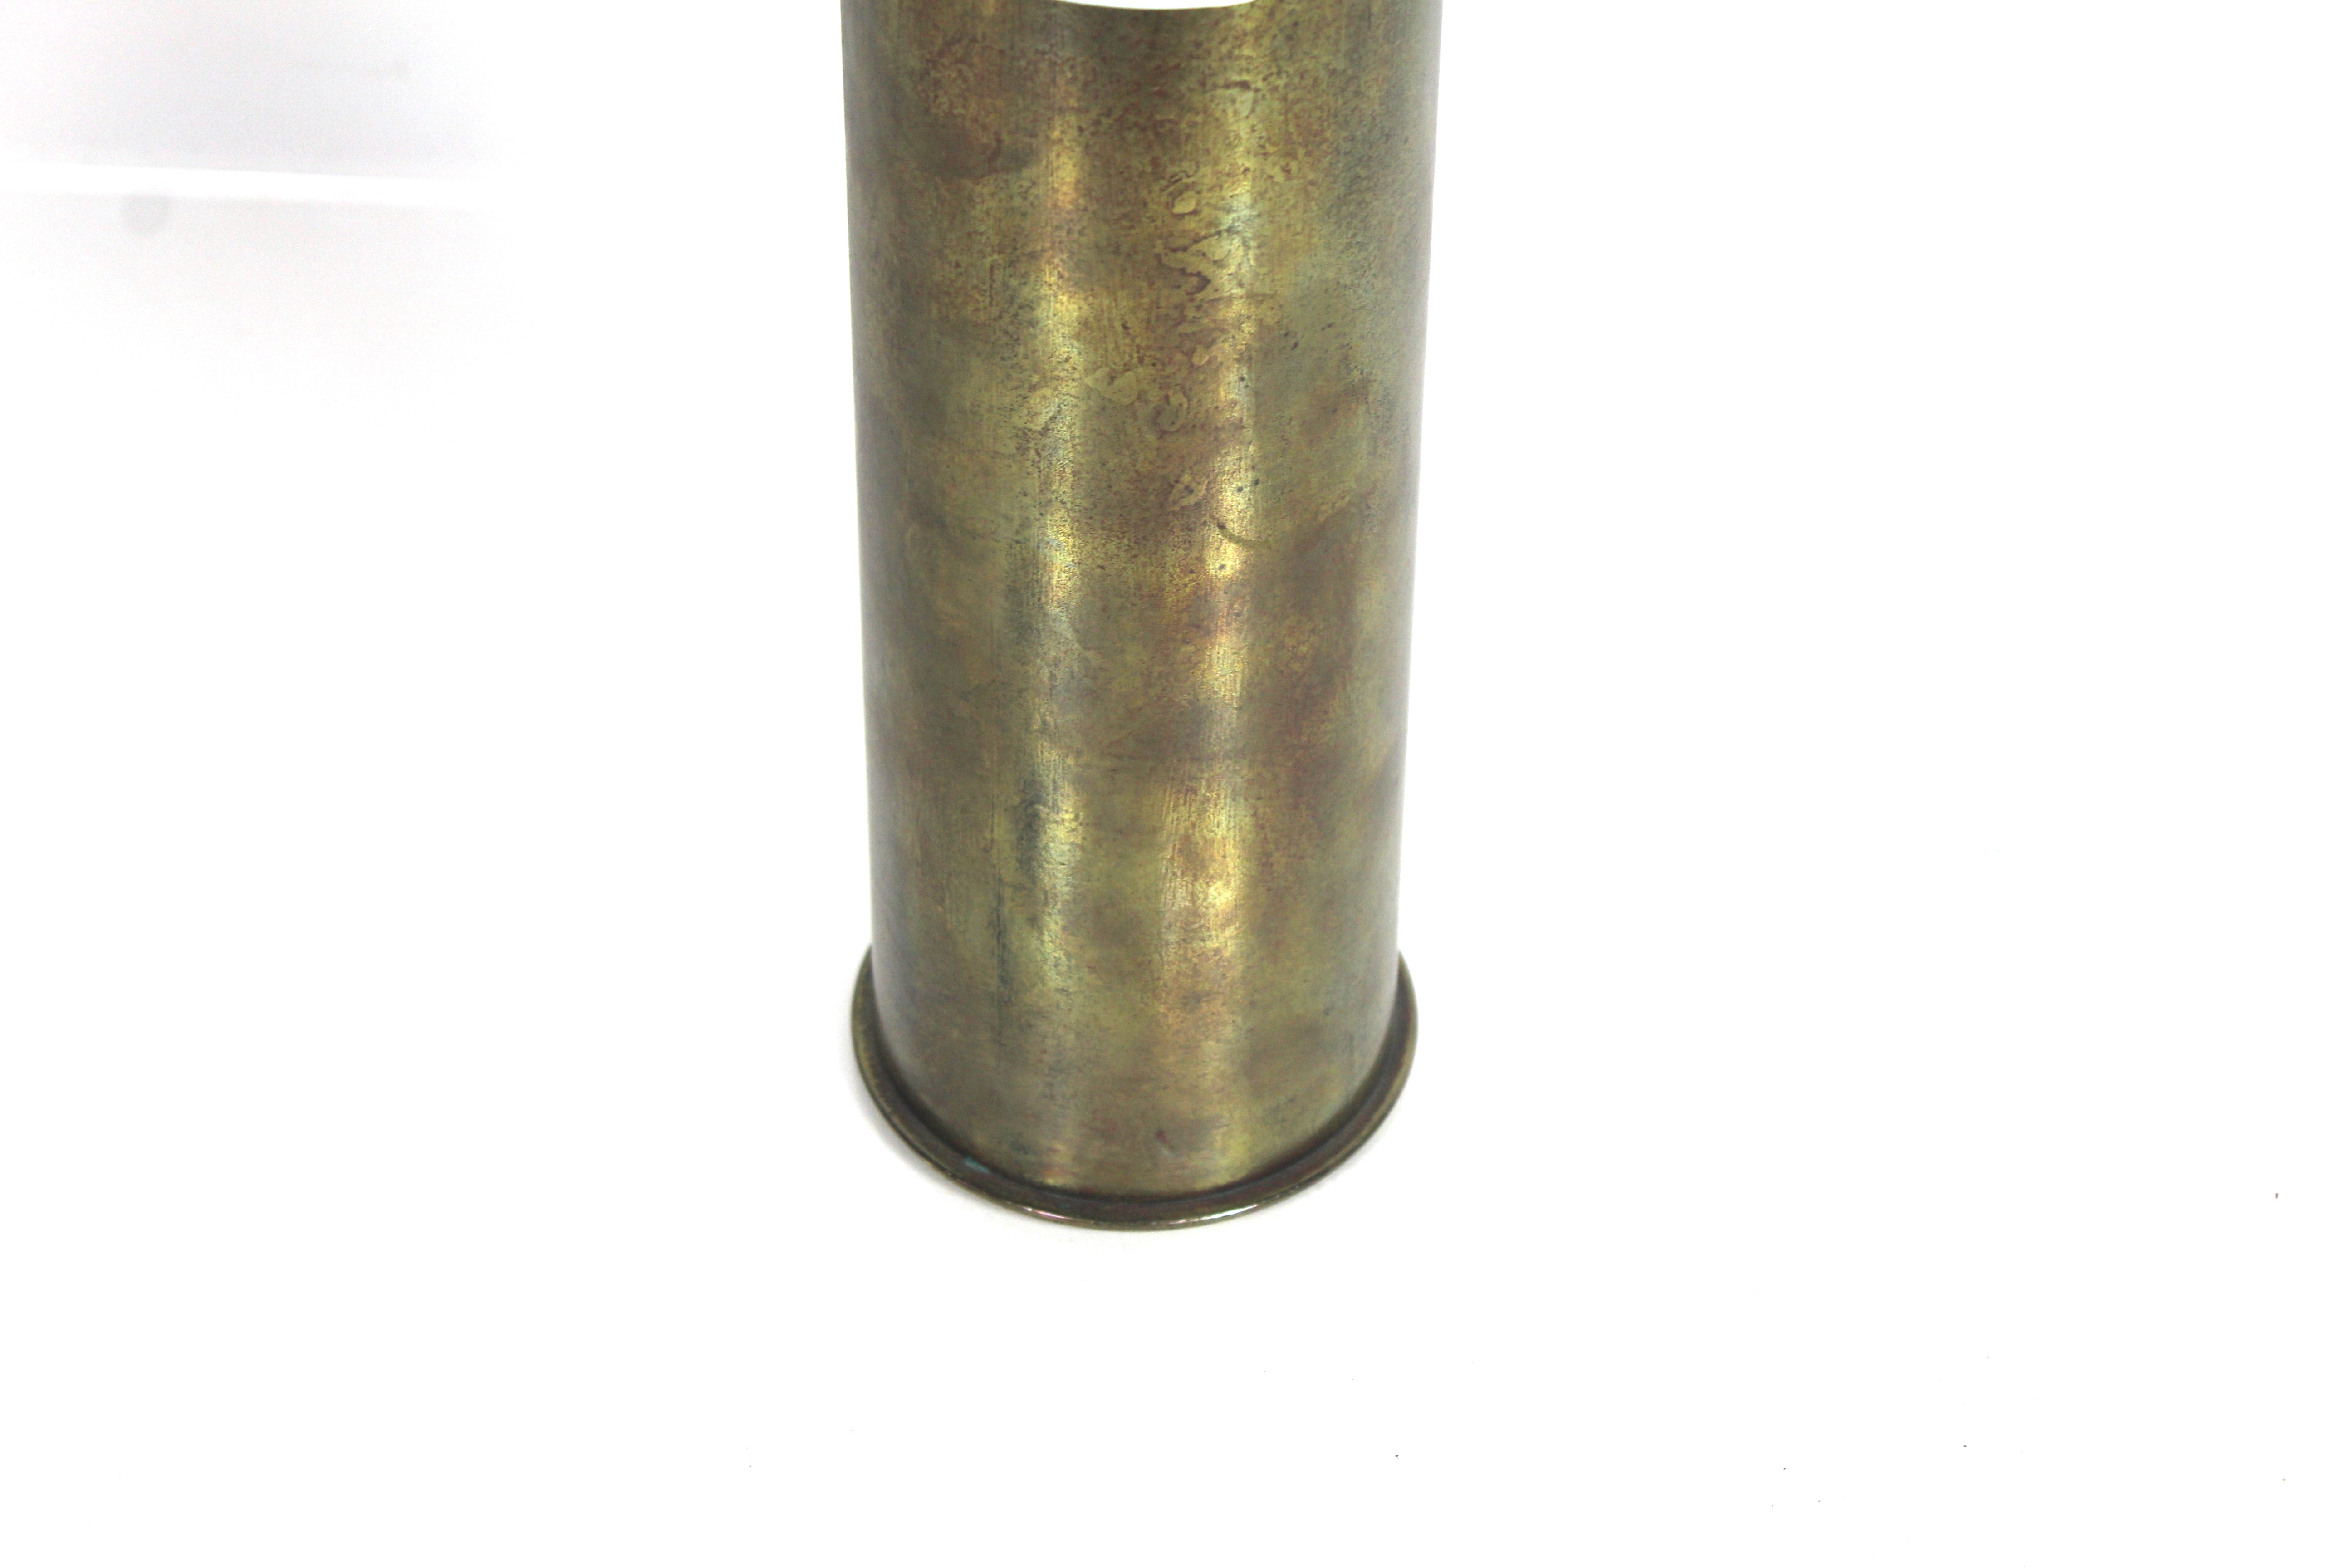 A 1906 dated German brass shell case approx. 15" i - Image 3 of 6